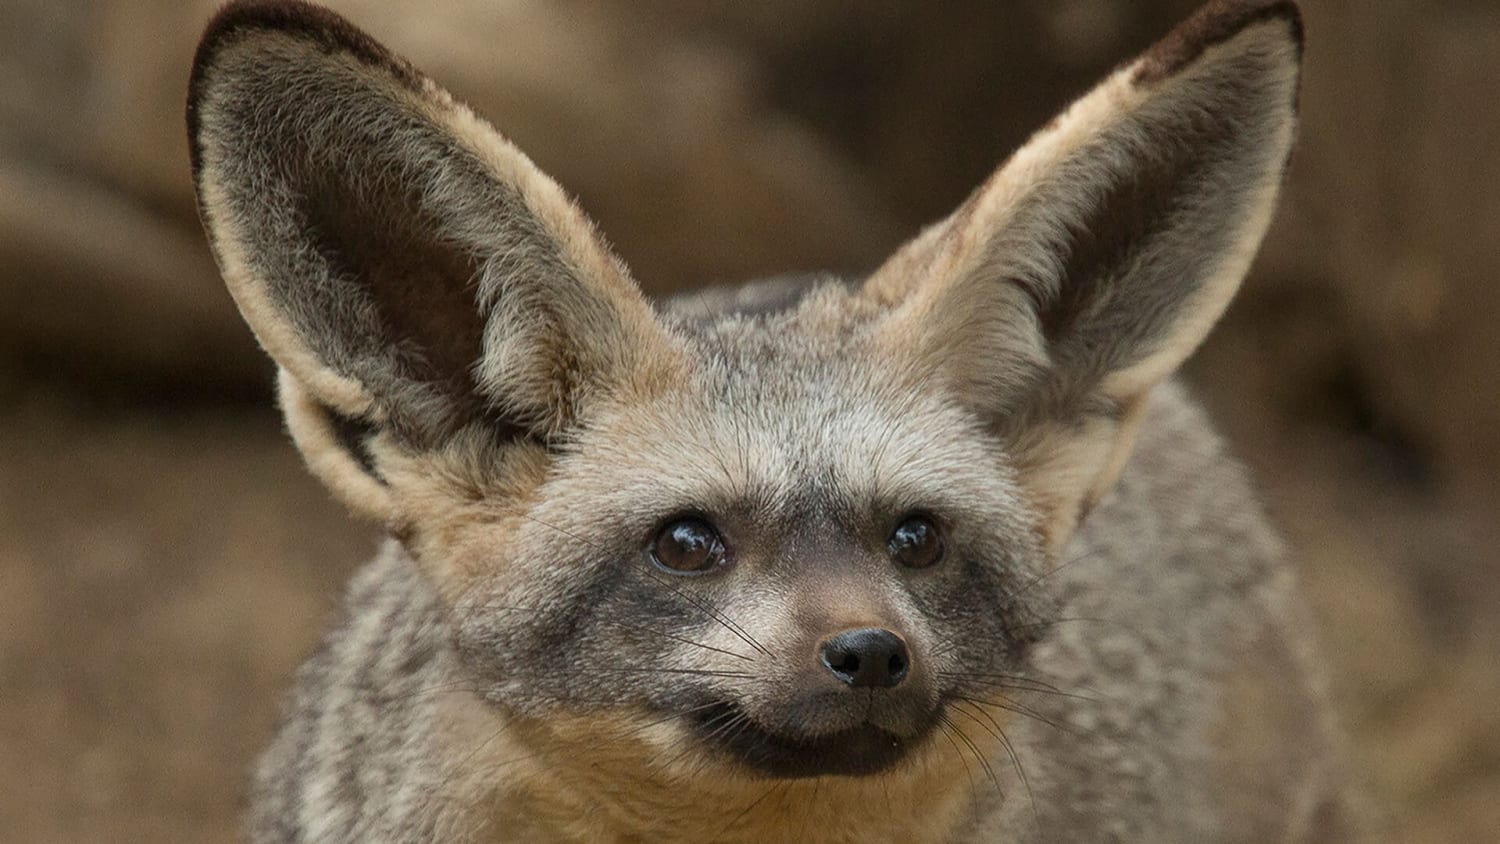 This is a Bat-eared fox, appropriately named for those big fluffy ears.They are relatively small canids ranging in weight from 3 kg to 5.3 kg.Those ears play a role in thermoregulation.Fossil records show this canid to first appear during the middle Pleistocene.They are found on the African savanna.